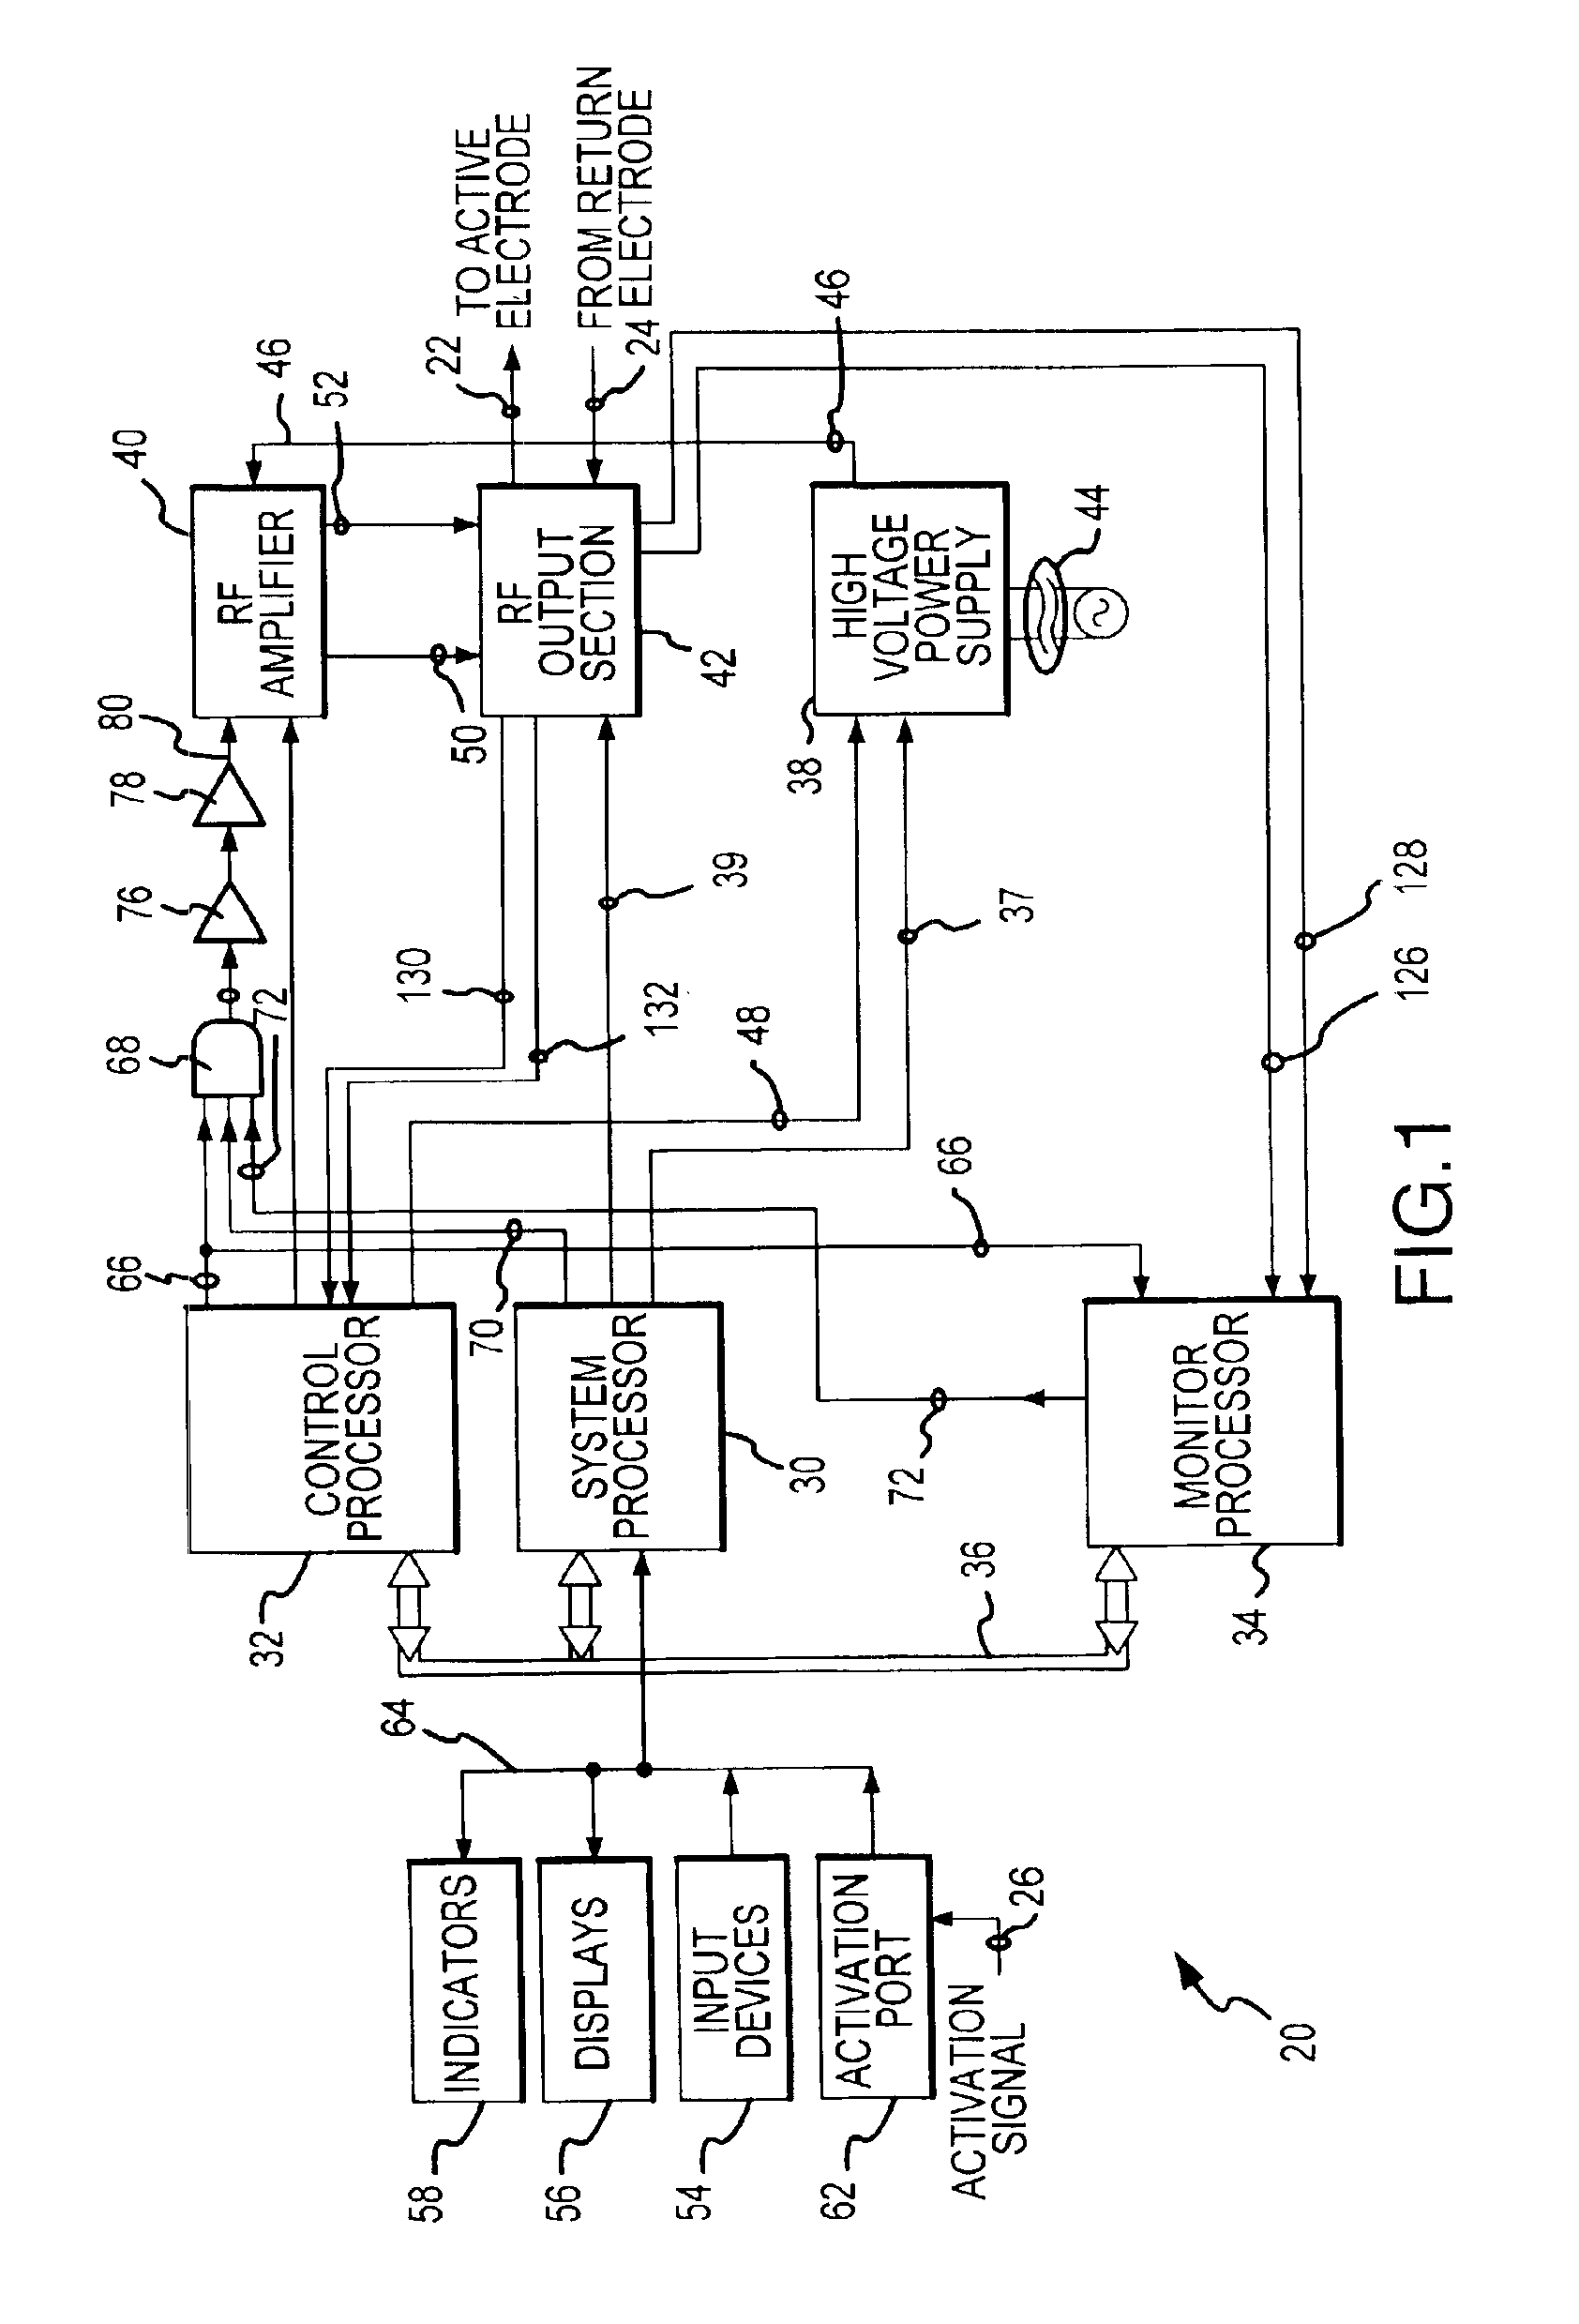 Electrosurgical generator and method for cross-checking mode functionality